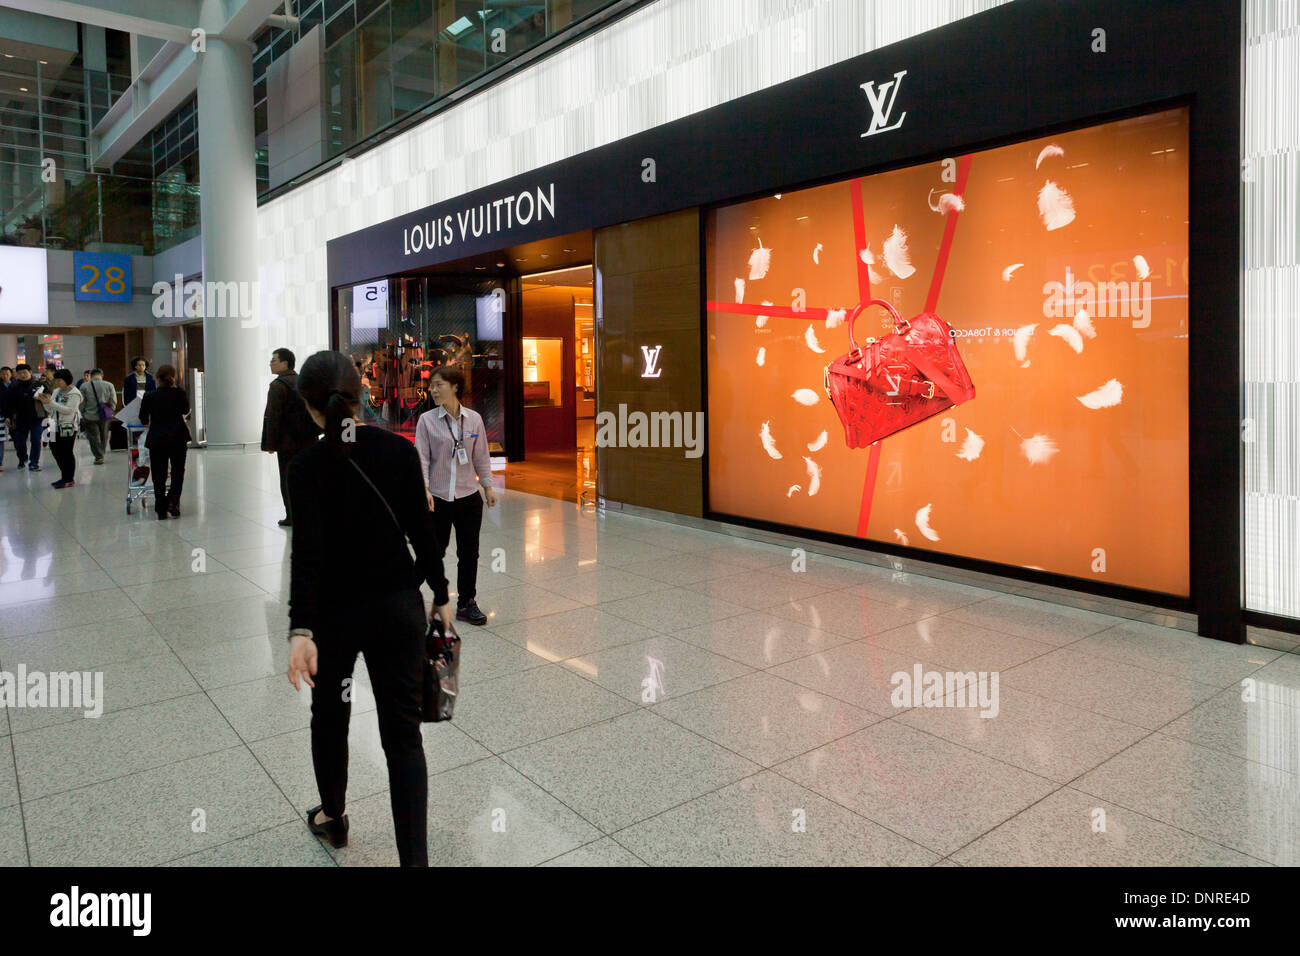 Louis Vuitton storefront at Incheon International Airport - South